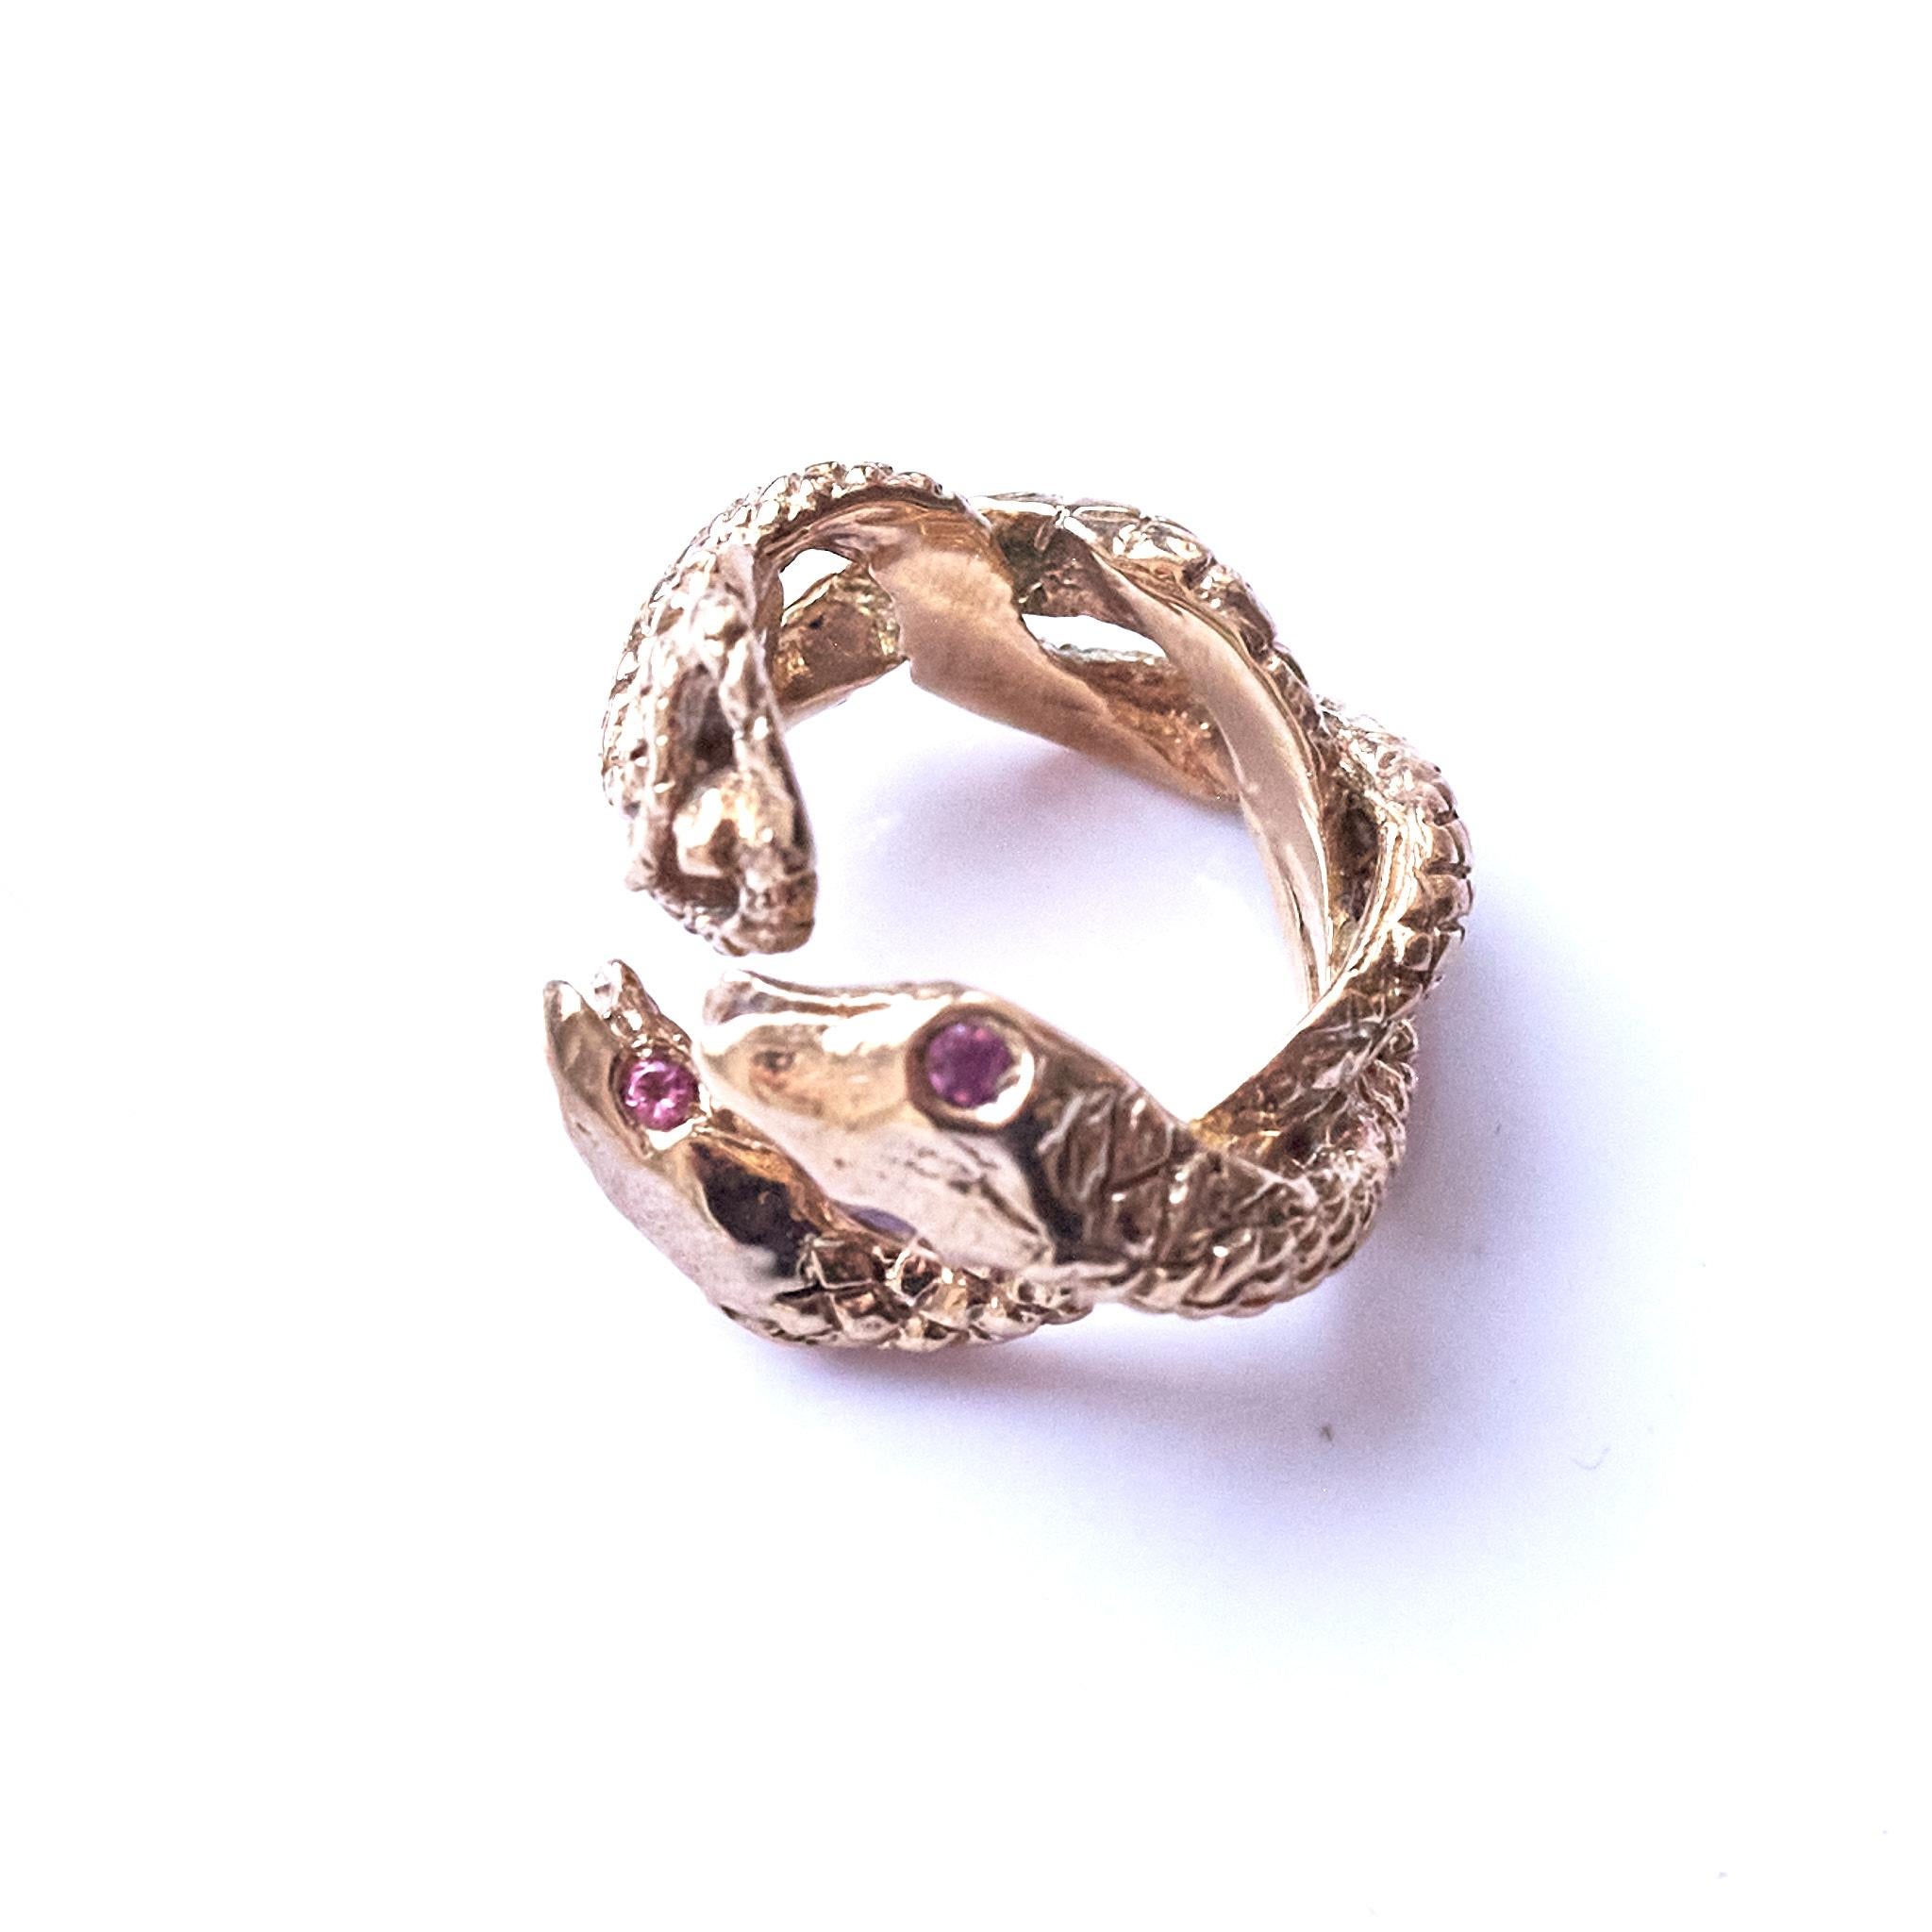 Animal Jewelry Pink Sapphire Snake Ring Bronze Cocktail Ring J Dauphin For Sale 6